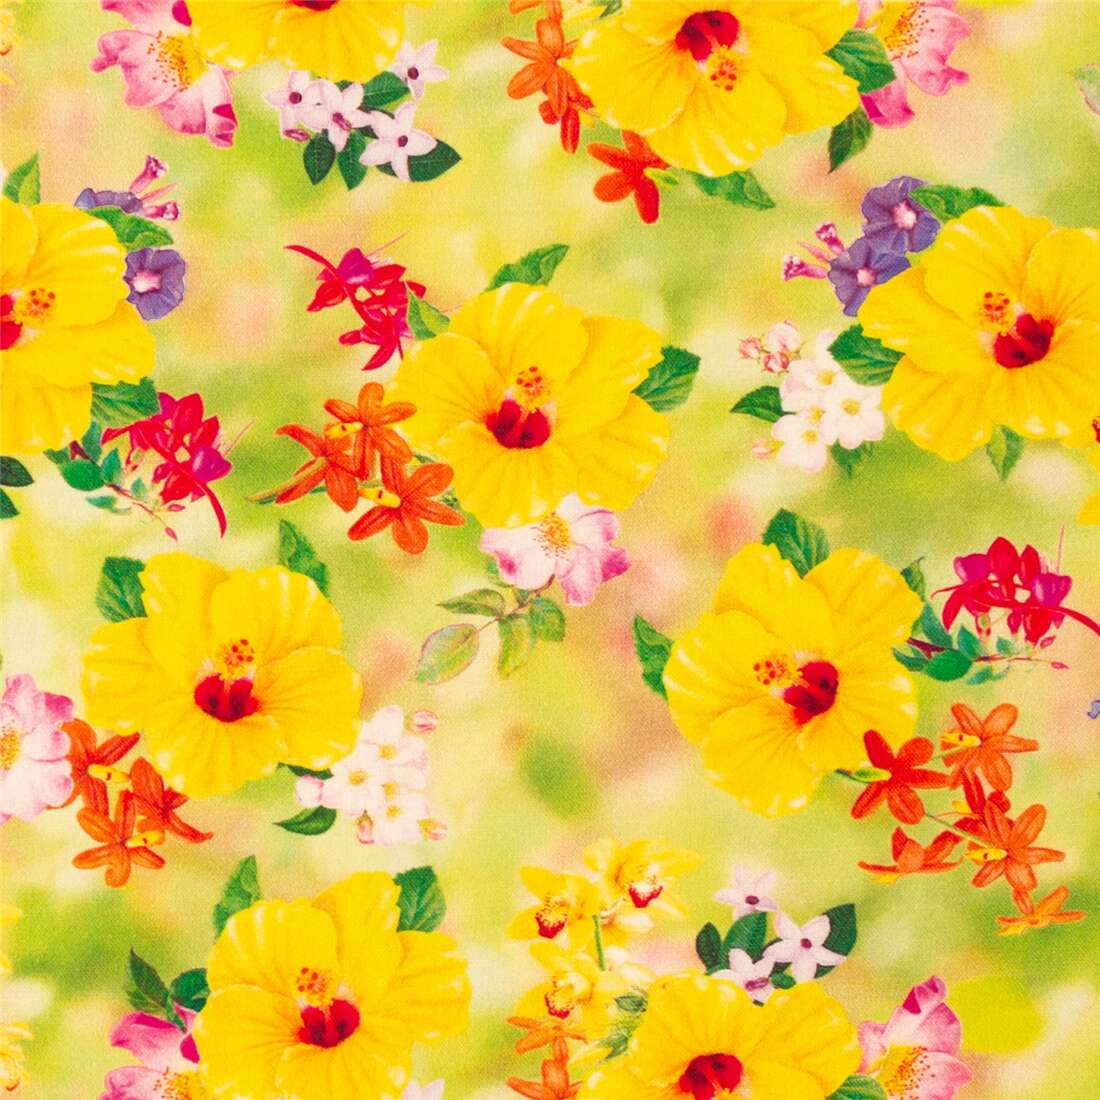 sortere lejesoldat For tidlig Mixed rainbow floral print Quilting Treasures yellow fabric - modeS4u